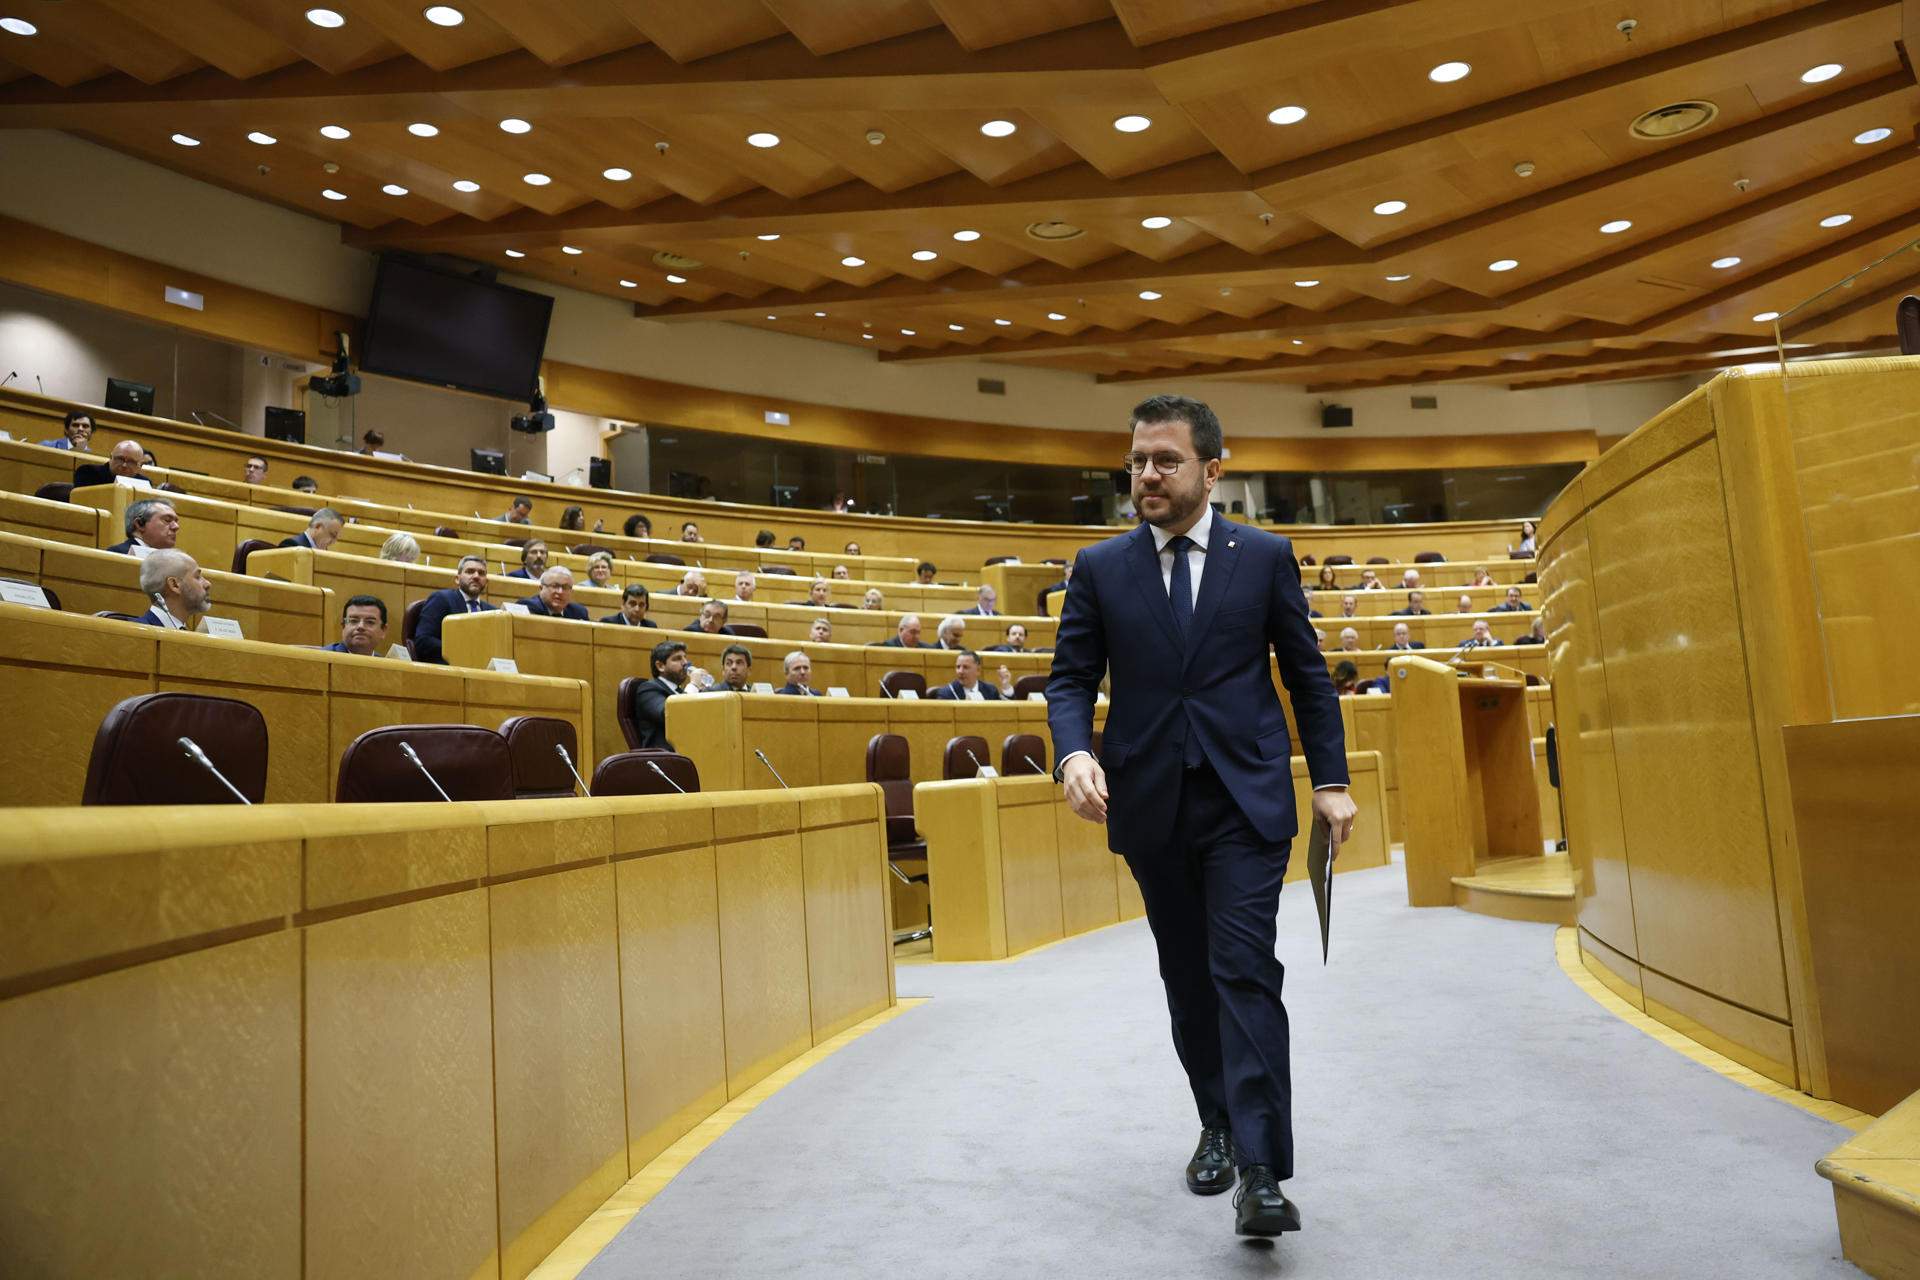 Aragonès, in the Senate: "The amnesty ceased to be impossible, as will occur with the referendum"